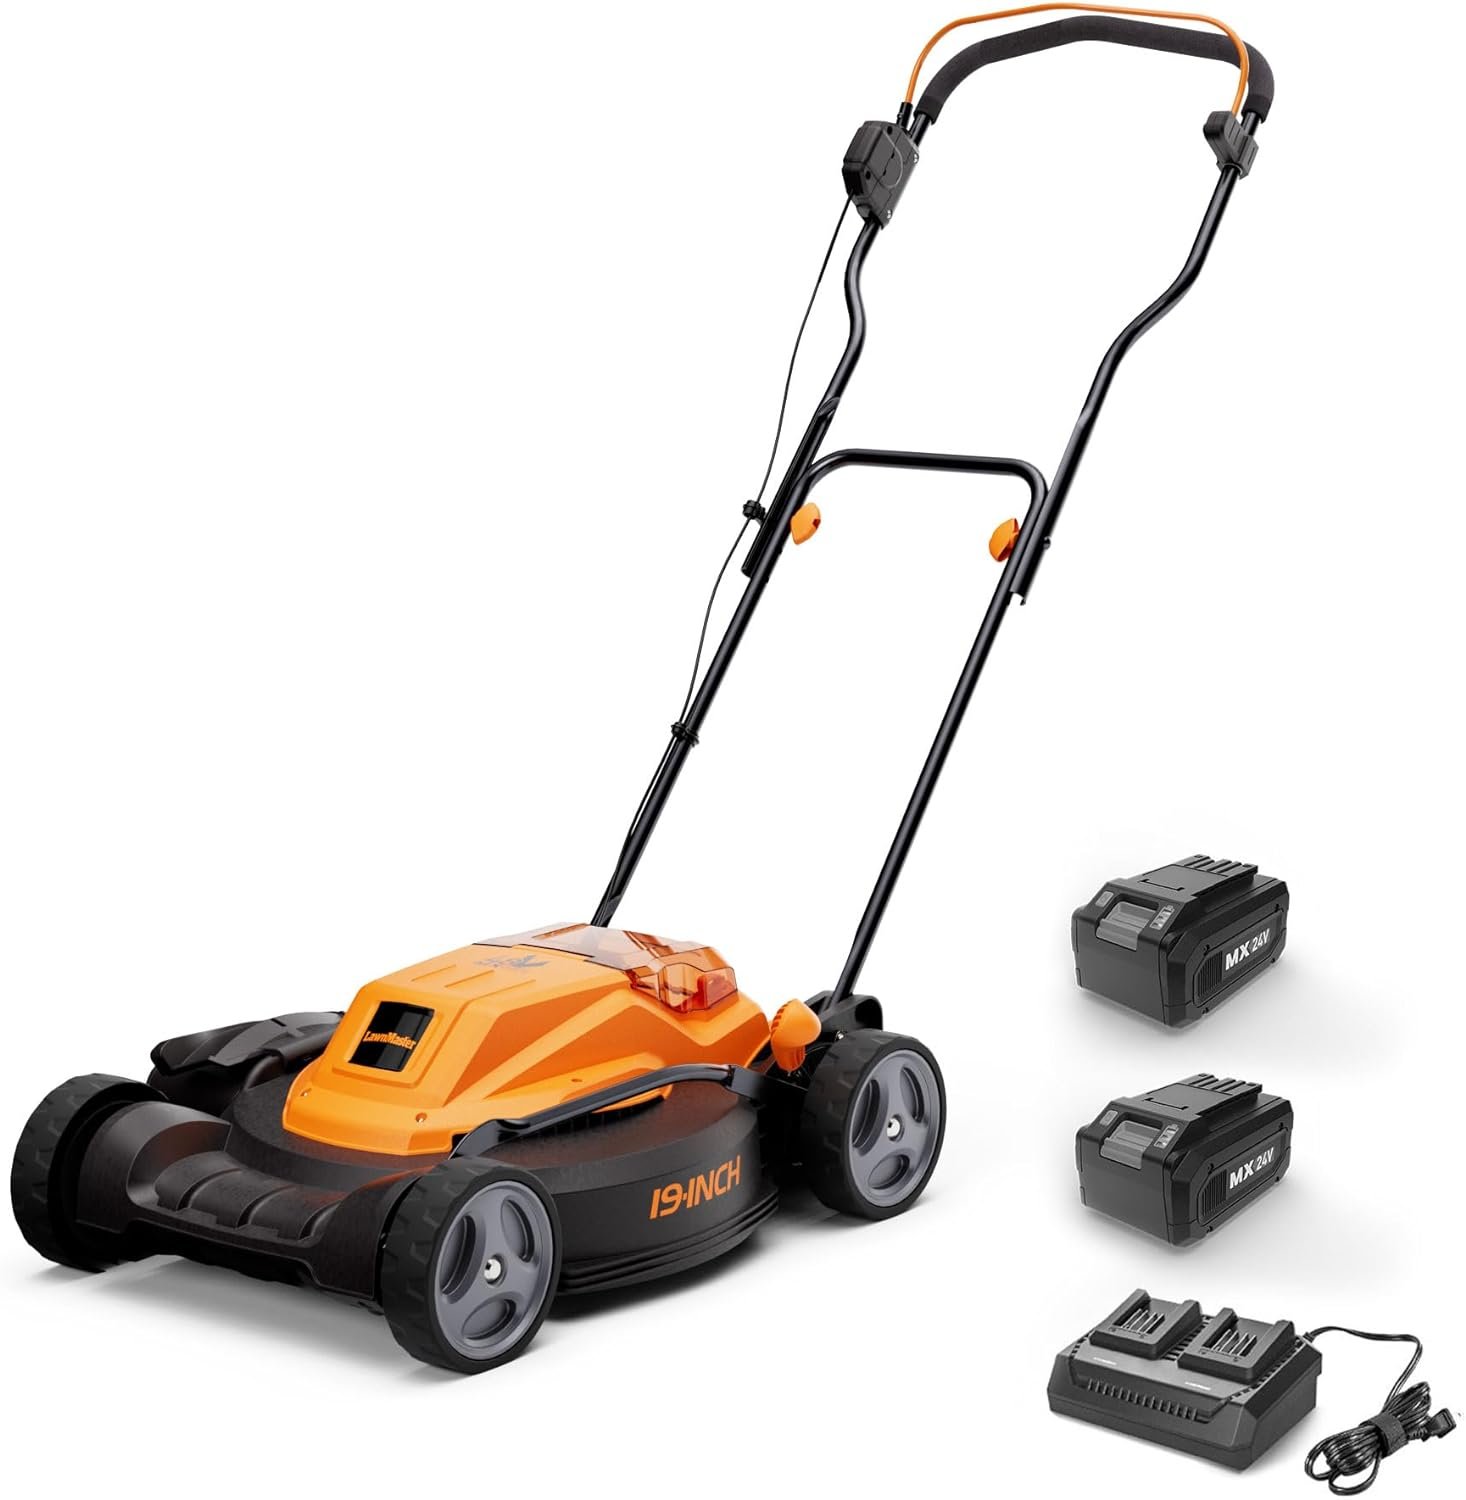 LawnMaster CLMF4819X 48V MAX* 19-inch Brushless Cordless Mower with 2X24V MAX* 4.0Ah Battery and a Dual Charger 6 Cutting Position